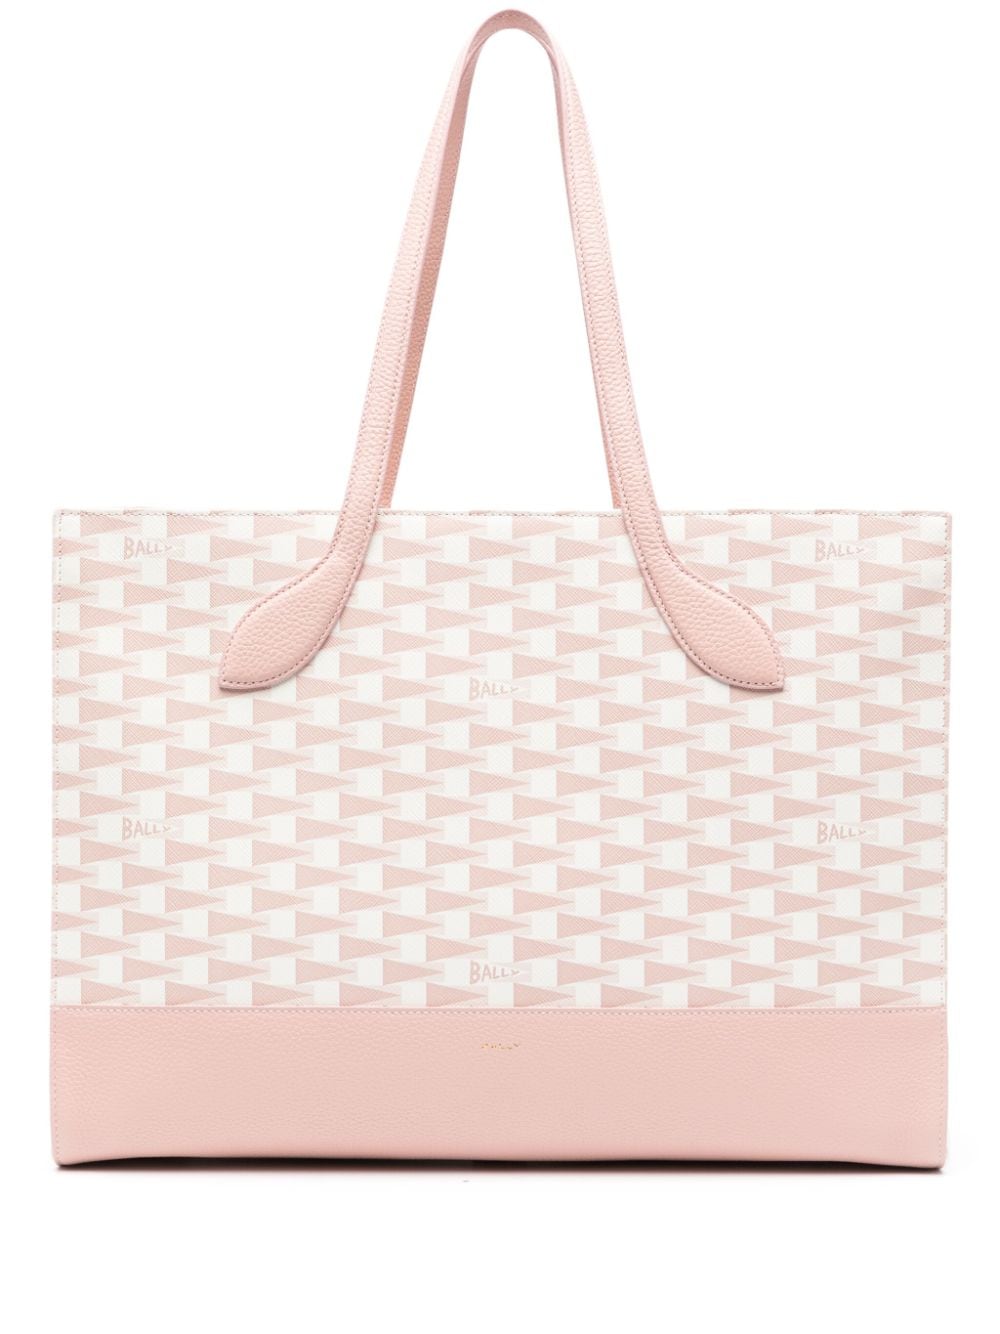 Bally Pennant leather tote bag - Pink von Bally